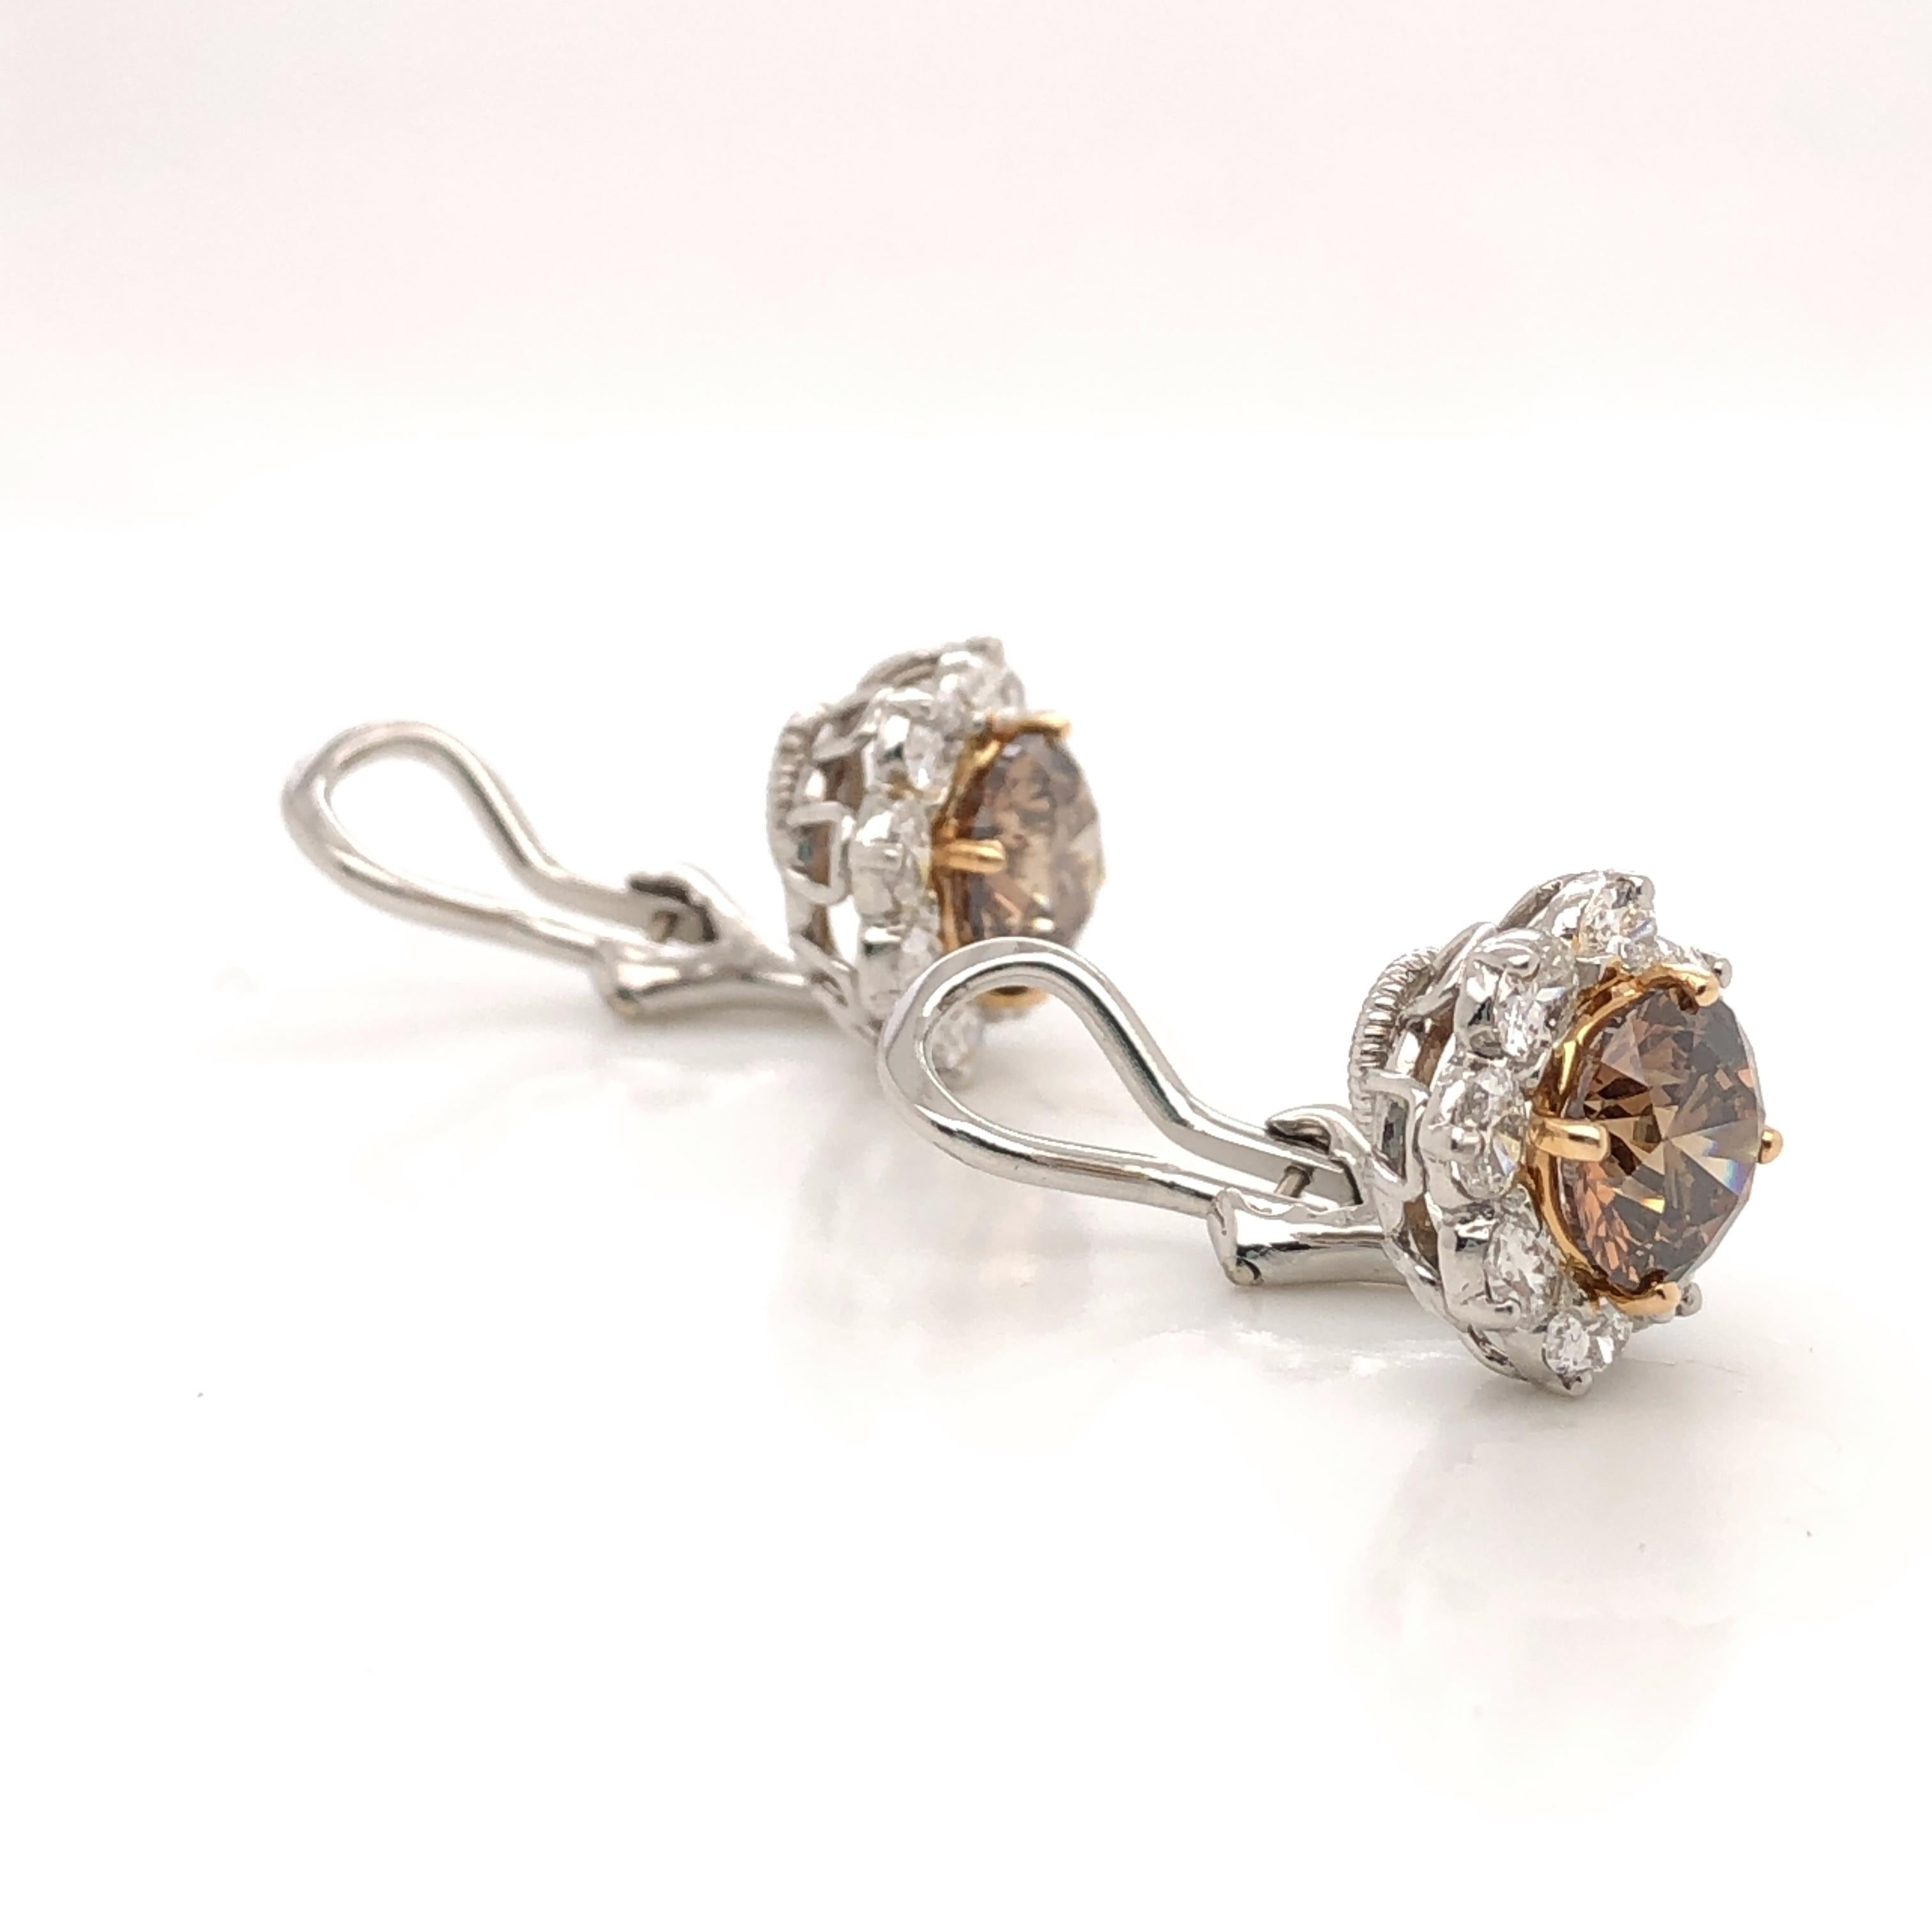 Oscar Heyman platinum and 18 karat gold earrings contain 2 cushion cognac diamonds (3.10cts VS2 & SI1) and 16 oval diamonds (1.08cts F-G/ VS). It is stamped with the makers mark, 18K and IRID PLAT, and serial number 706021.

Earrings measure 12mm H